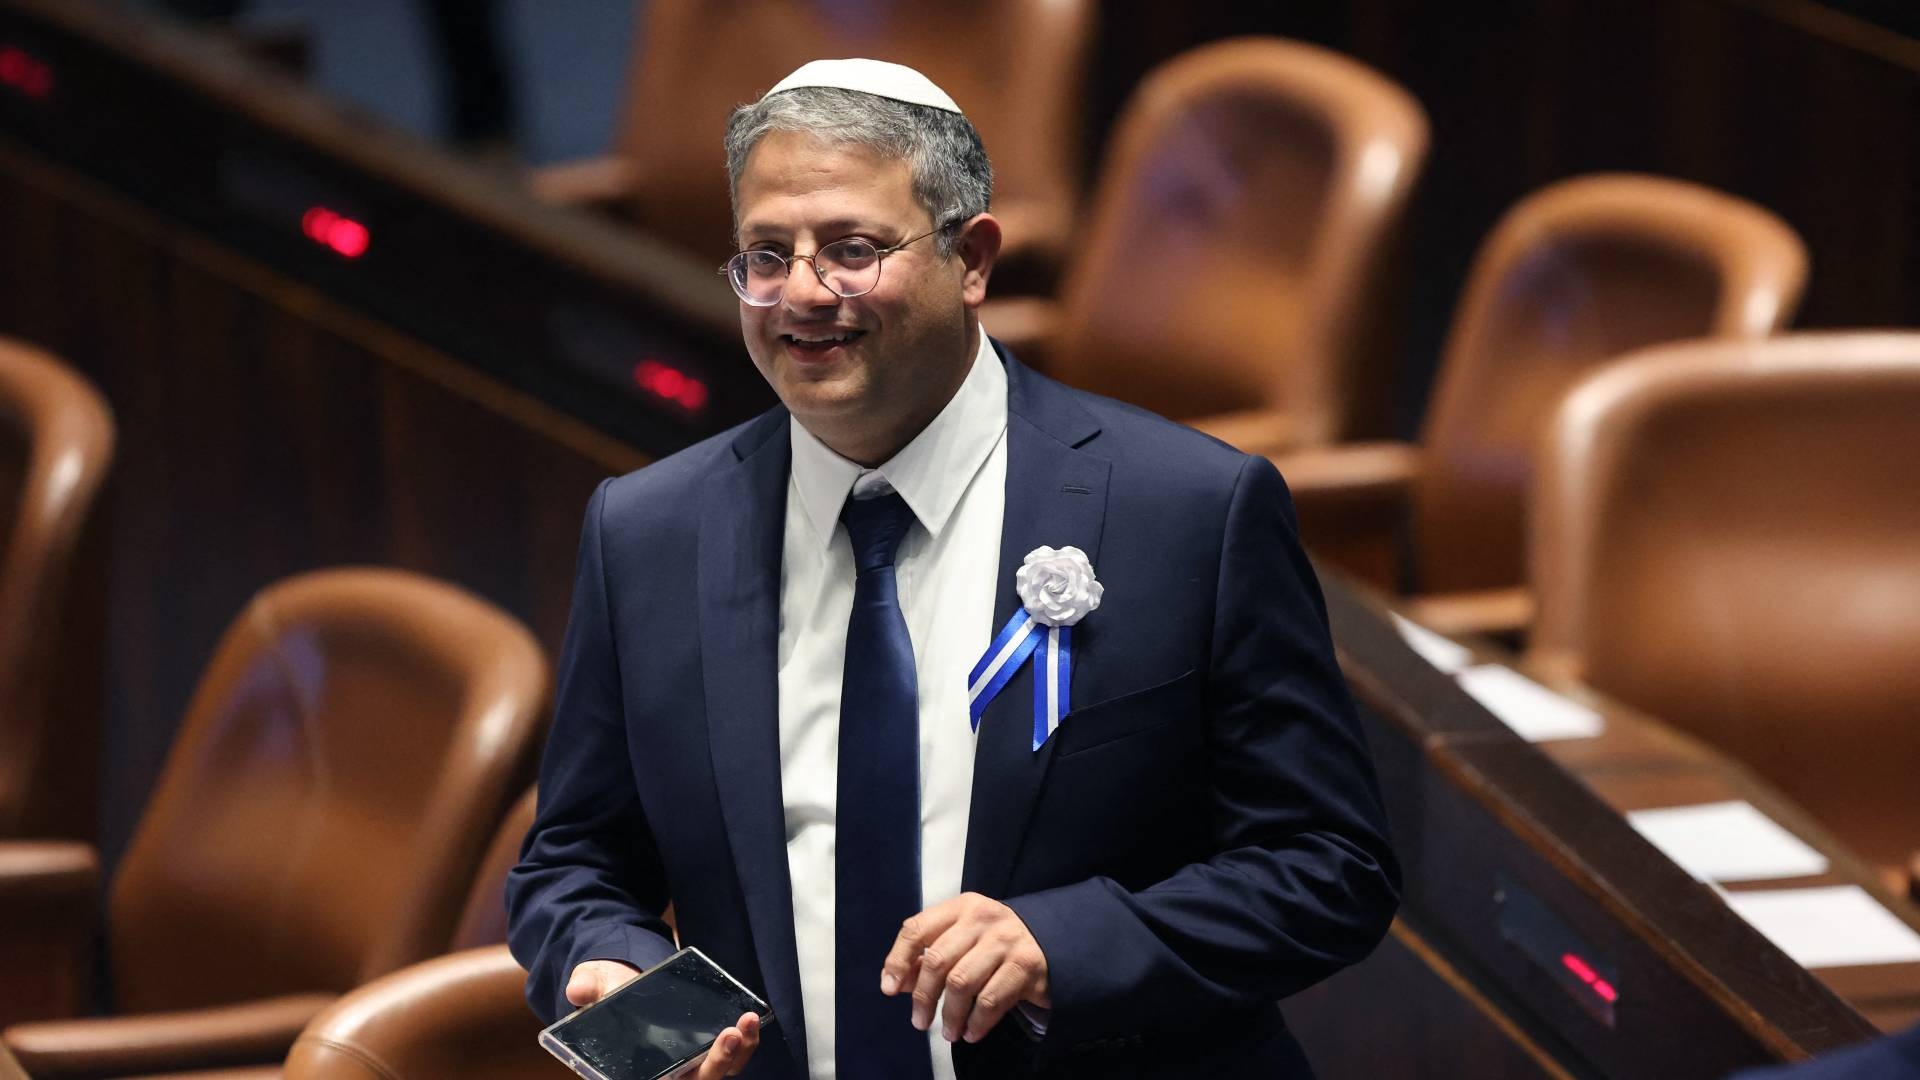 Israeli right-wing Knesset member Itamar ben Gvir during the swearing-in ceremony at the Knesset in Jerusalem, 15 November 2022 (AFP)